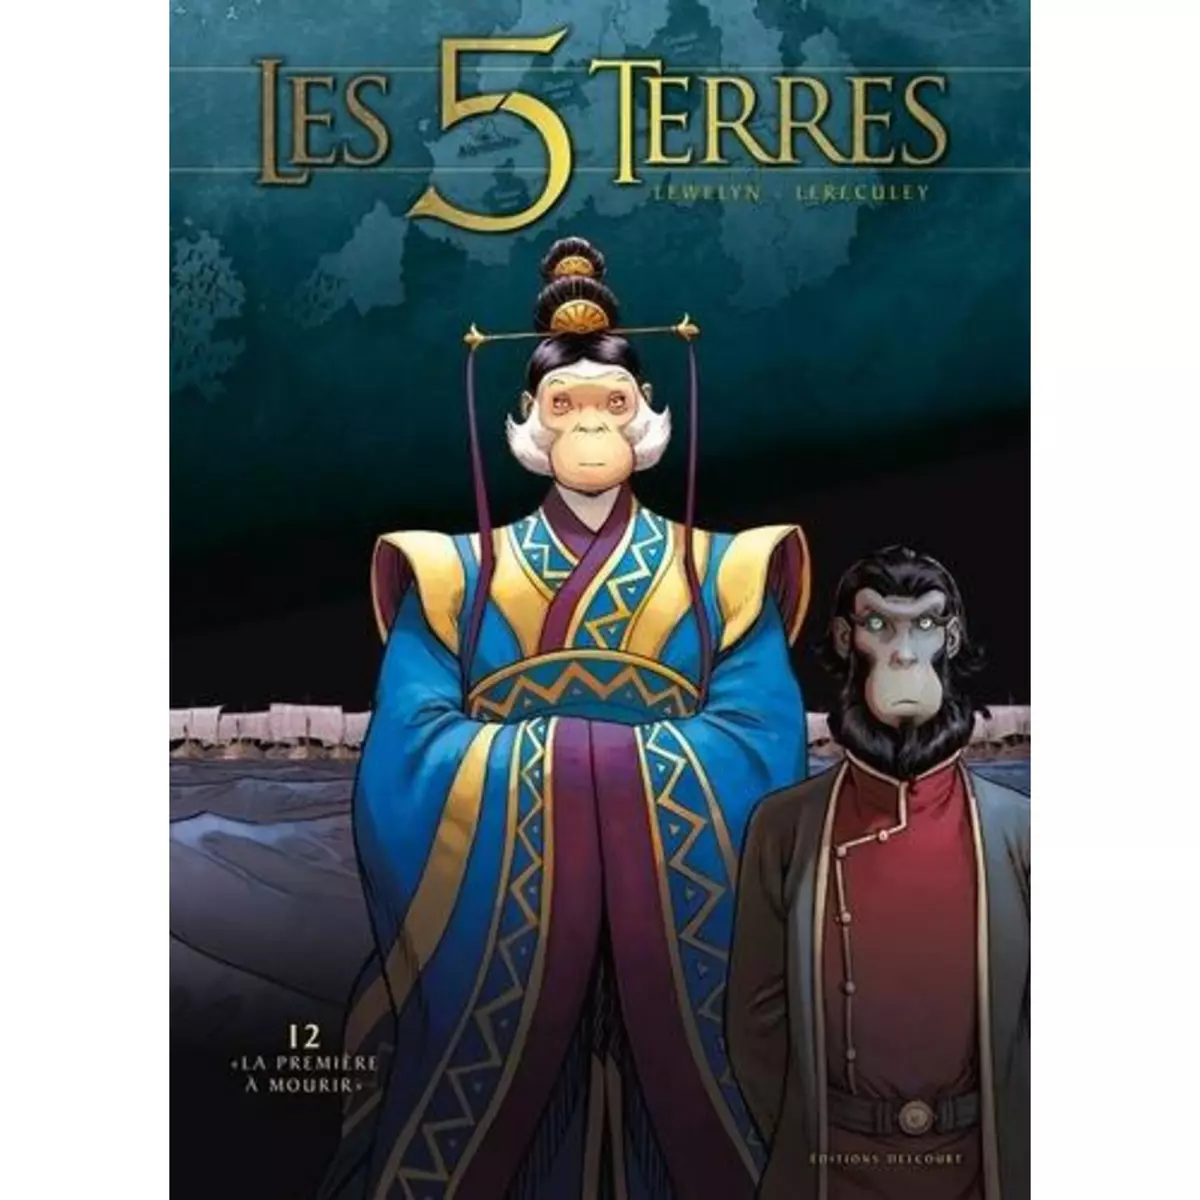  LES 5 TERRES : CYCLE II - LYS TOME 12 : LA PREMIERE A MOURIR, Lewelyn